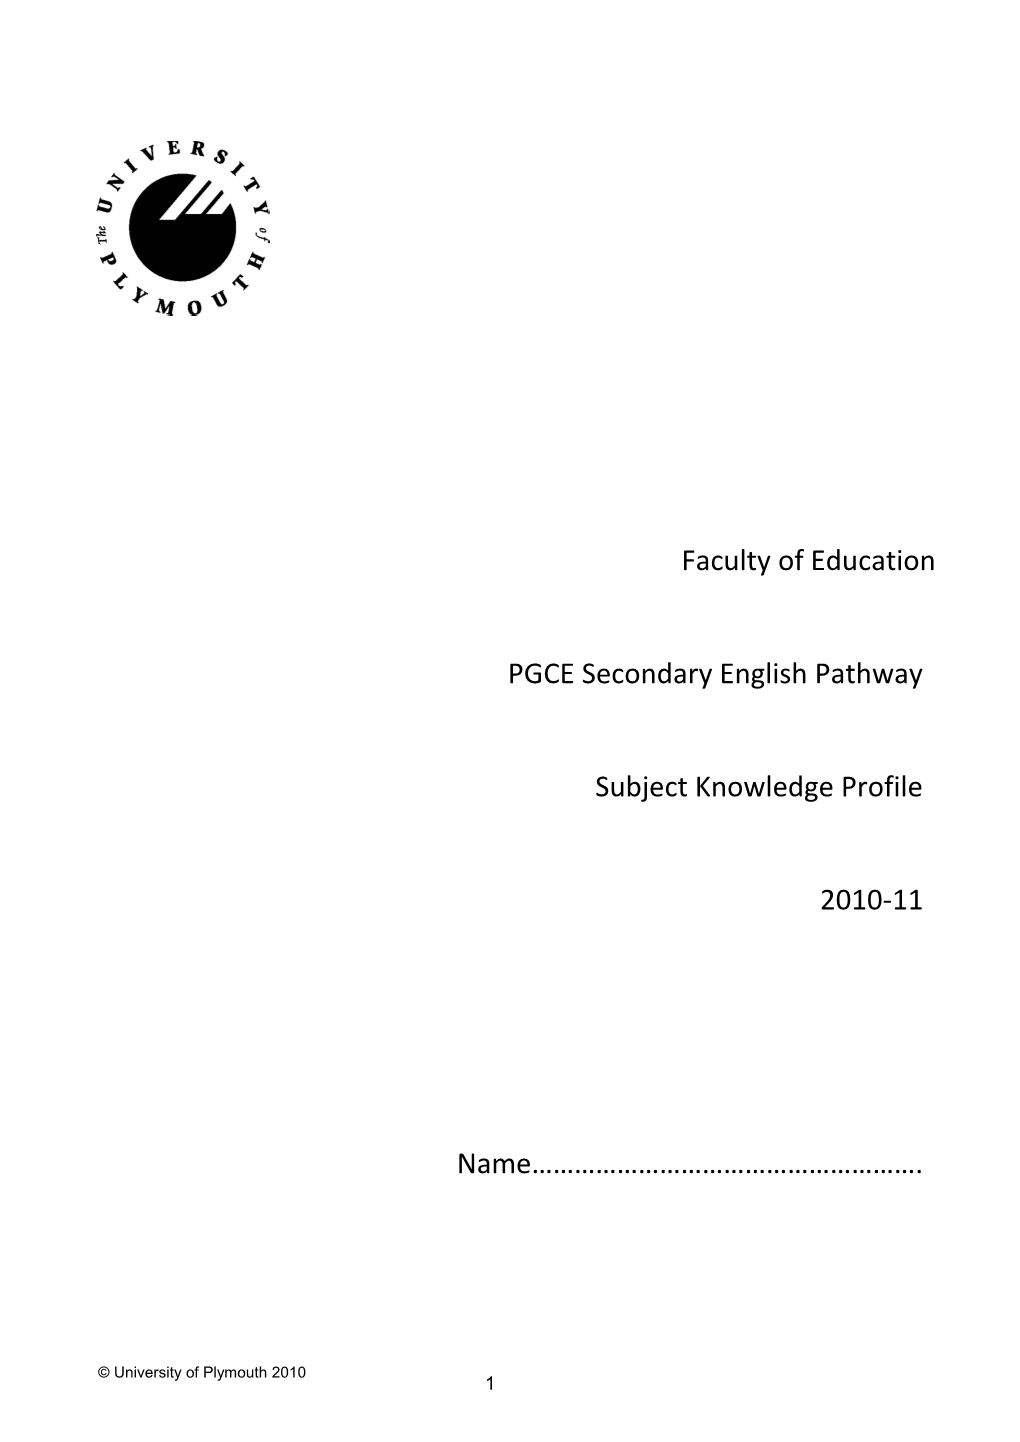 Audit Of Knowledge, Understanding And Skills In English